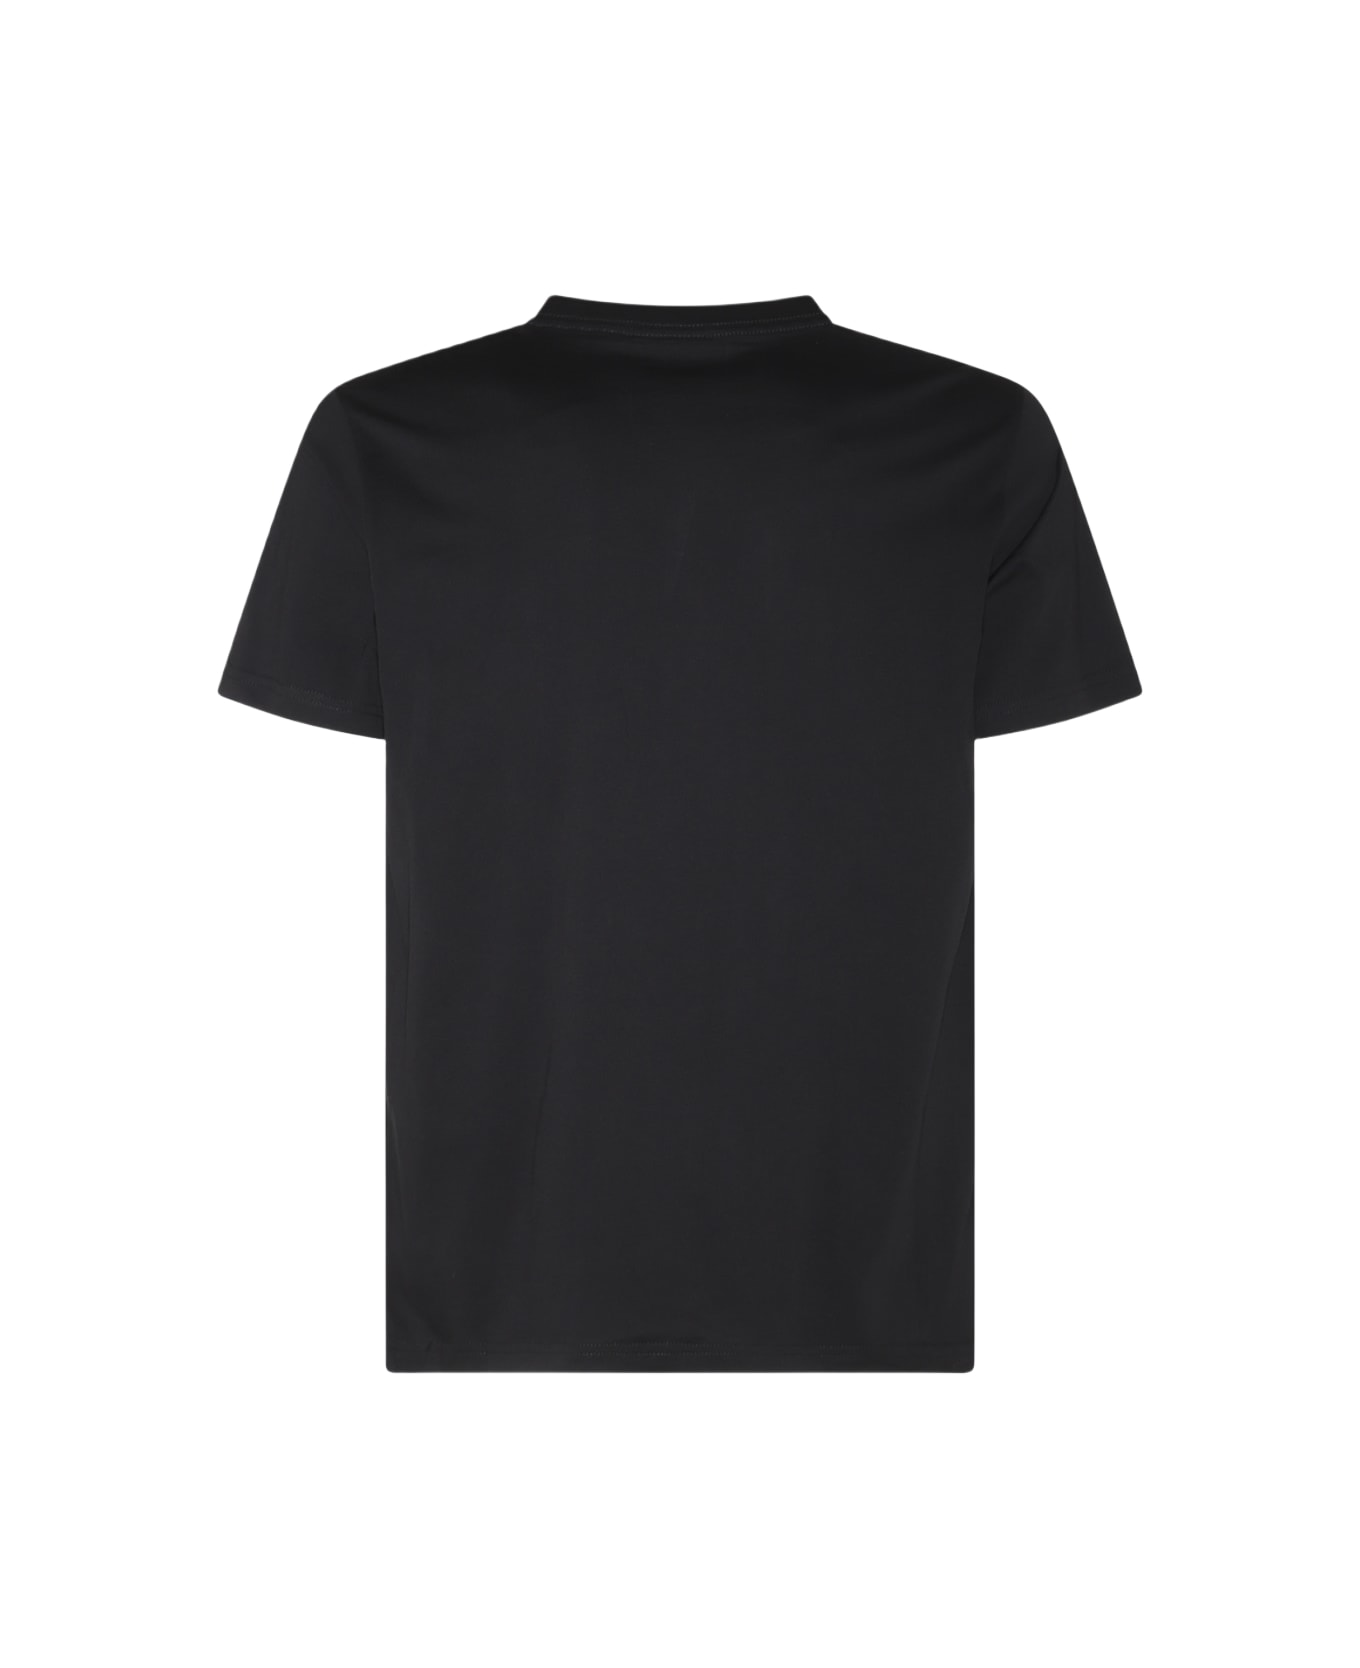 PS by Paul Smith Black Cotton T-shirt - BLACK シャツ